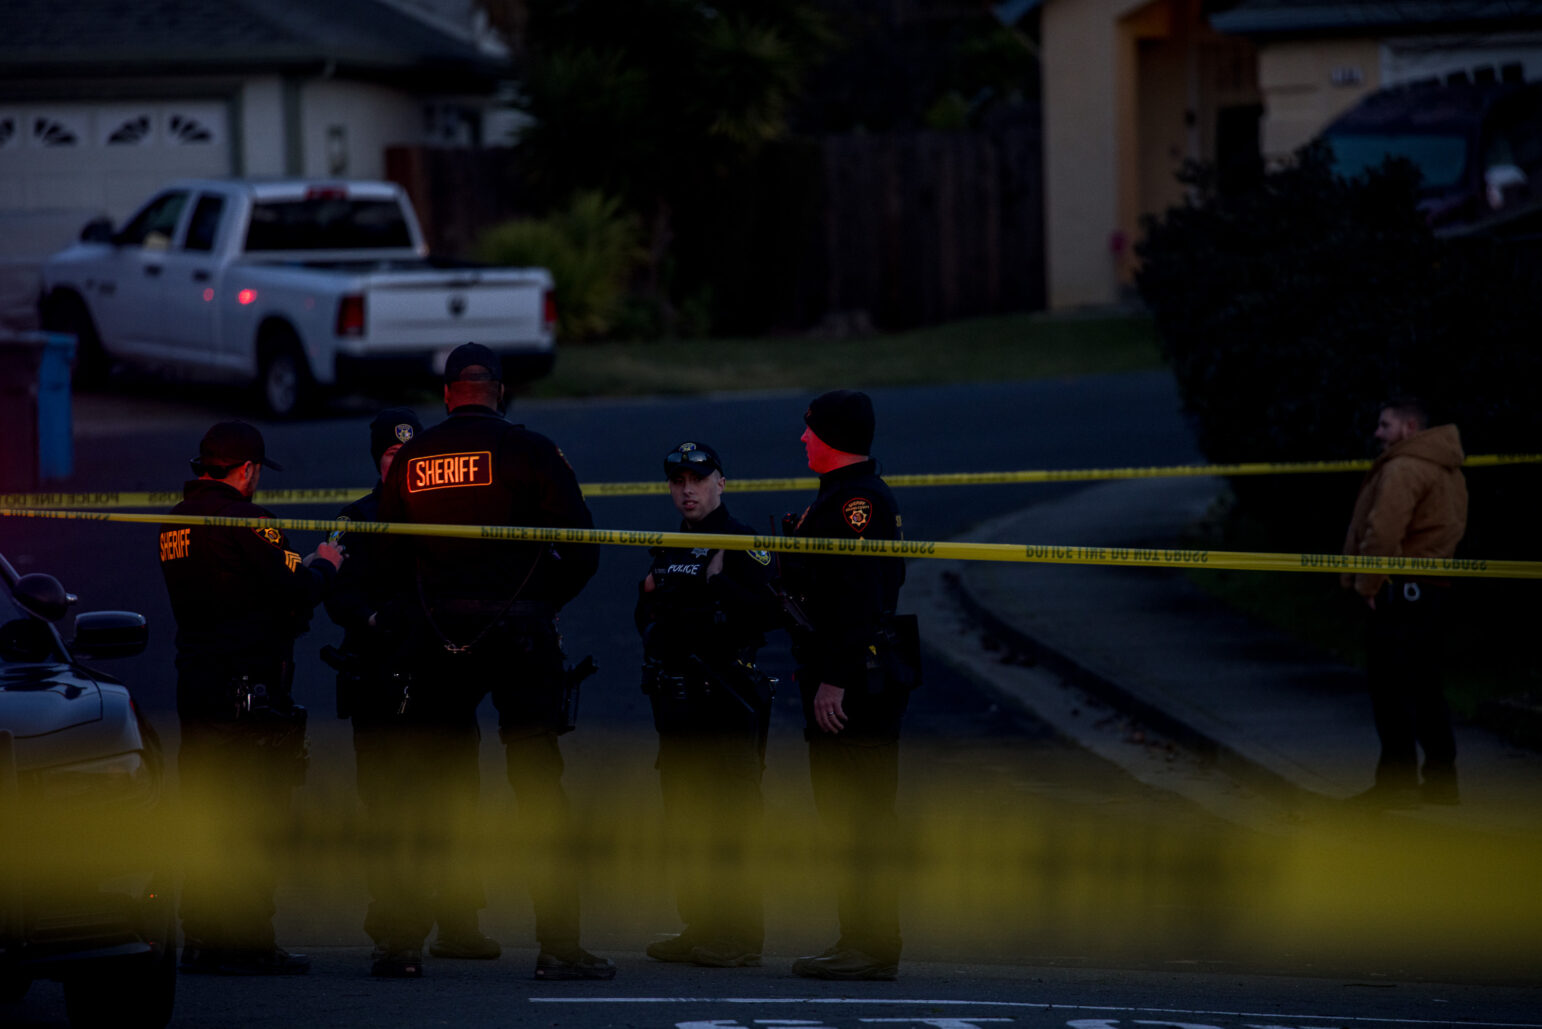 A group of police and deputies stand behind crime scene tape after dusk.